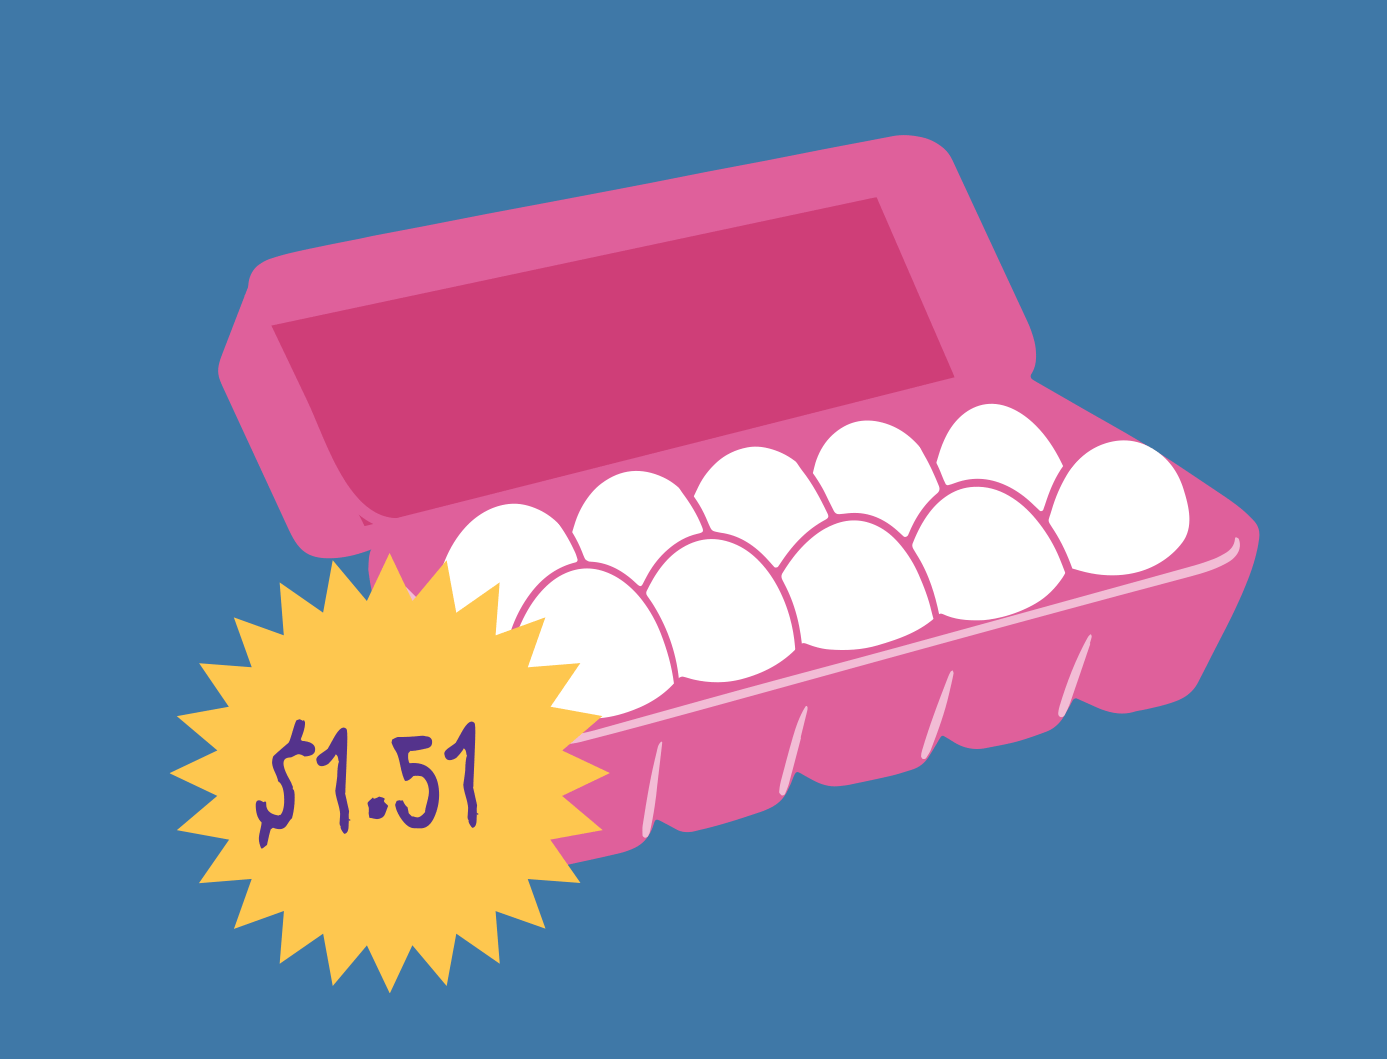 An animated illustration in which the pricetag on a carton of eggs changed from $1.51 to $5.99